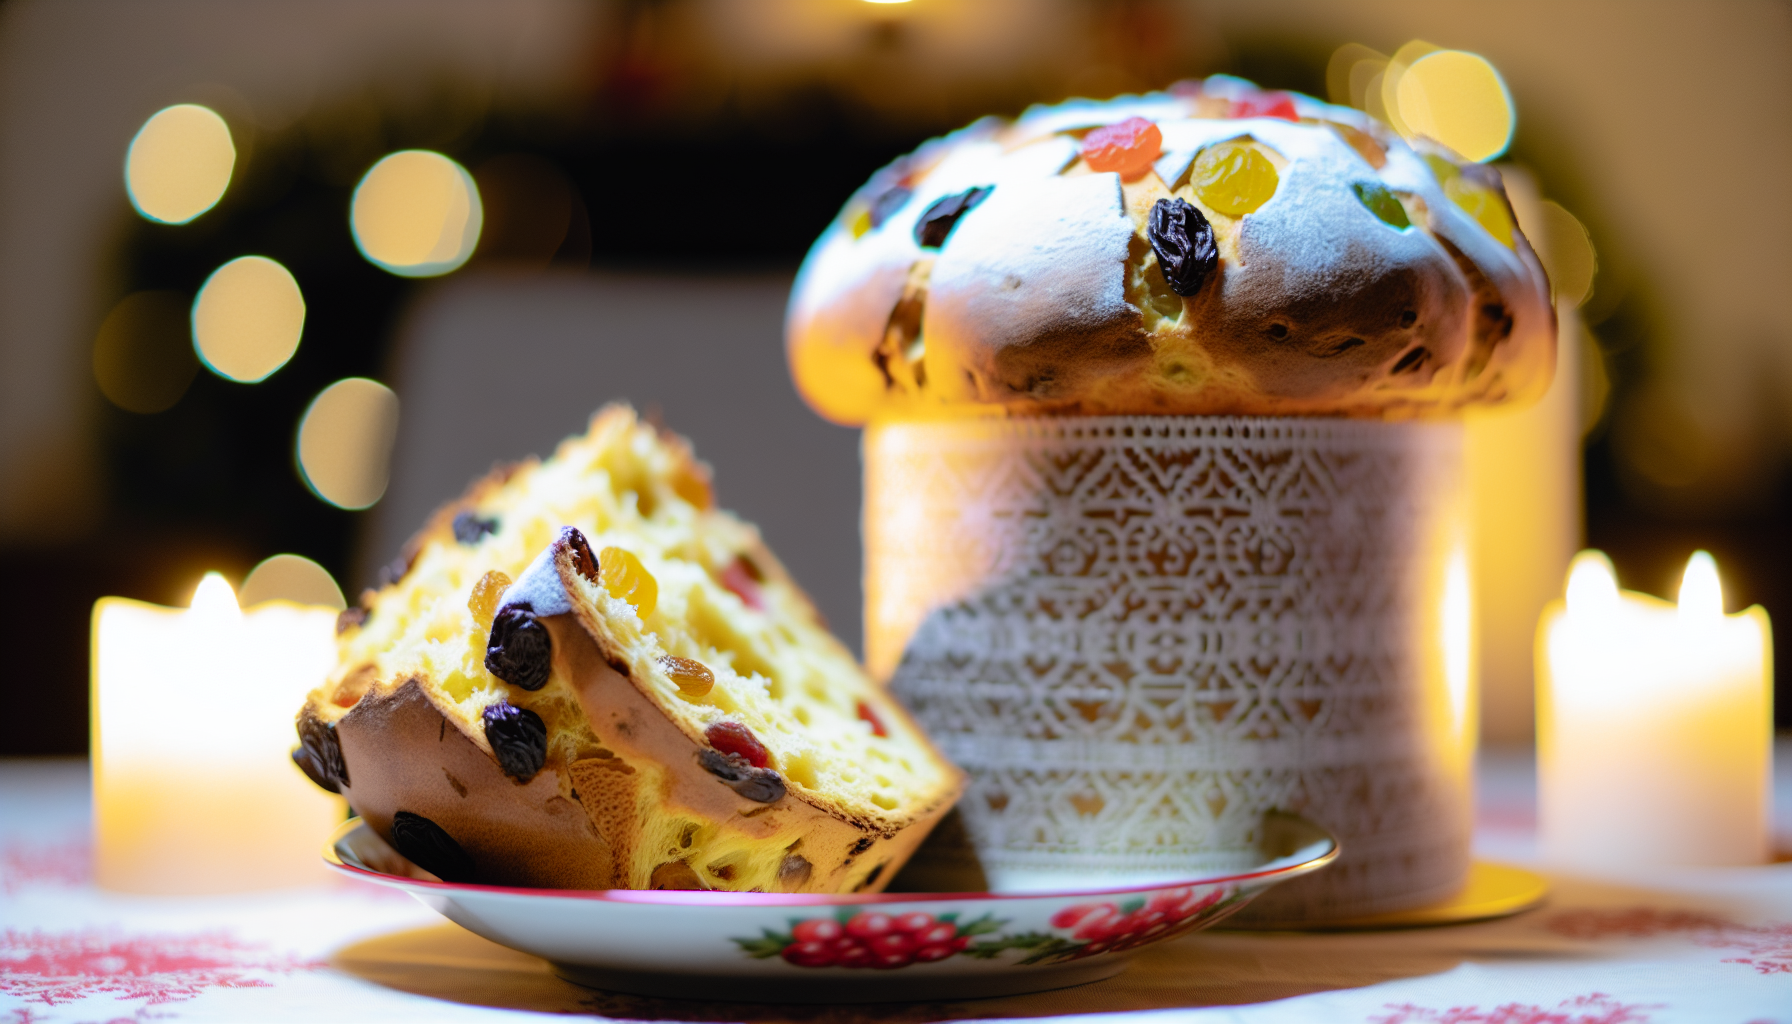 Panettone, a sweet Italian fruitcake filled with candied fruits and raisins, often enjoyed during the holiday season